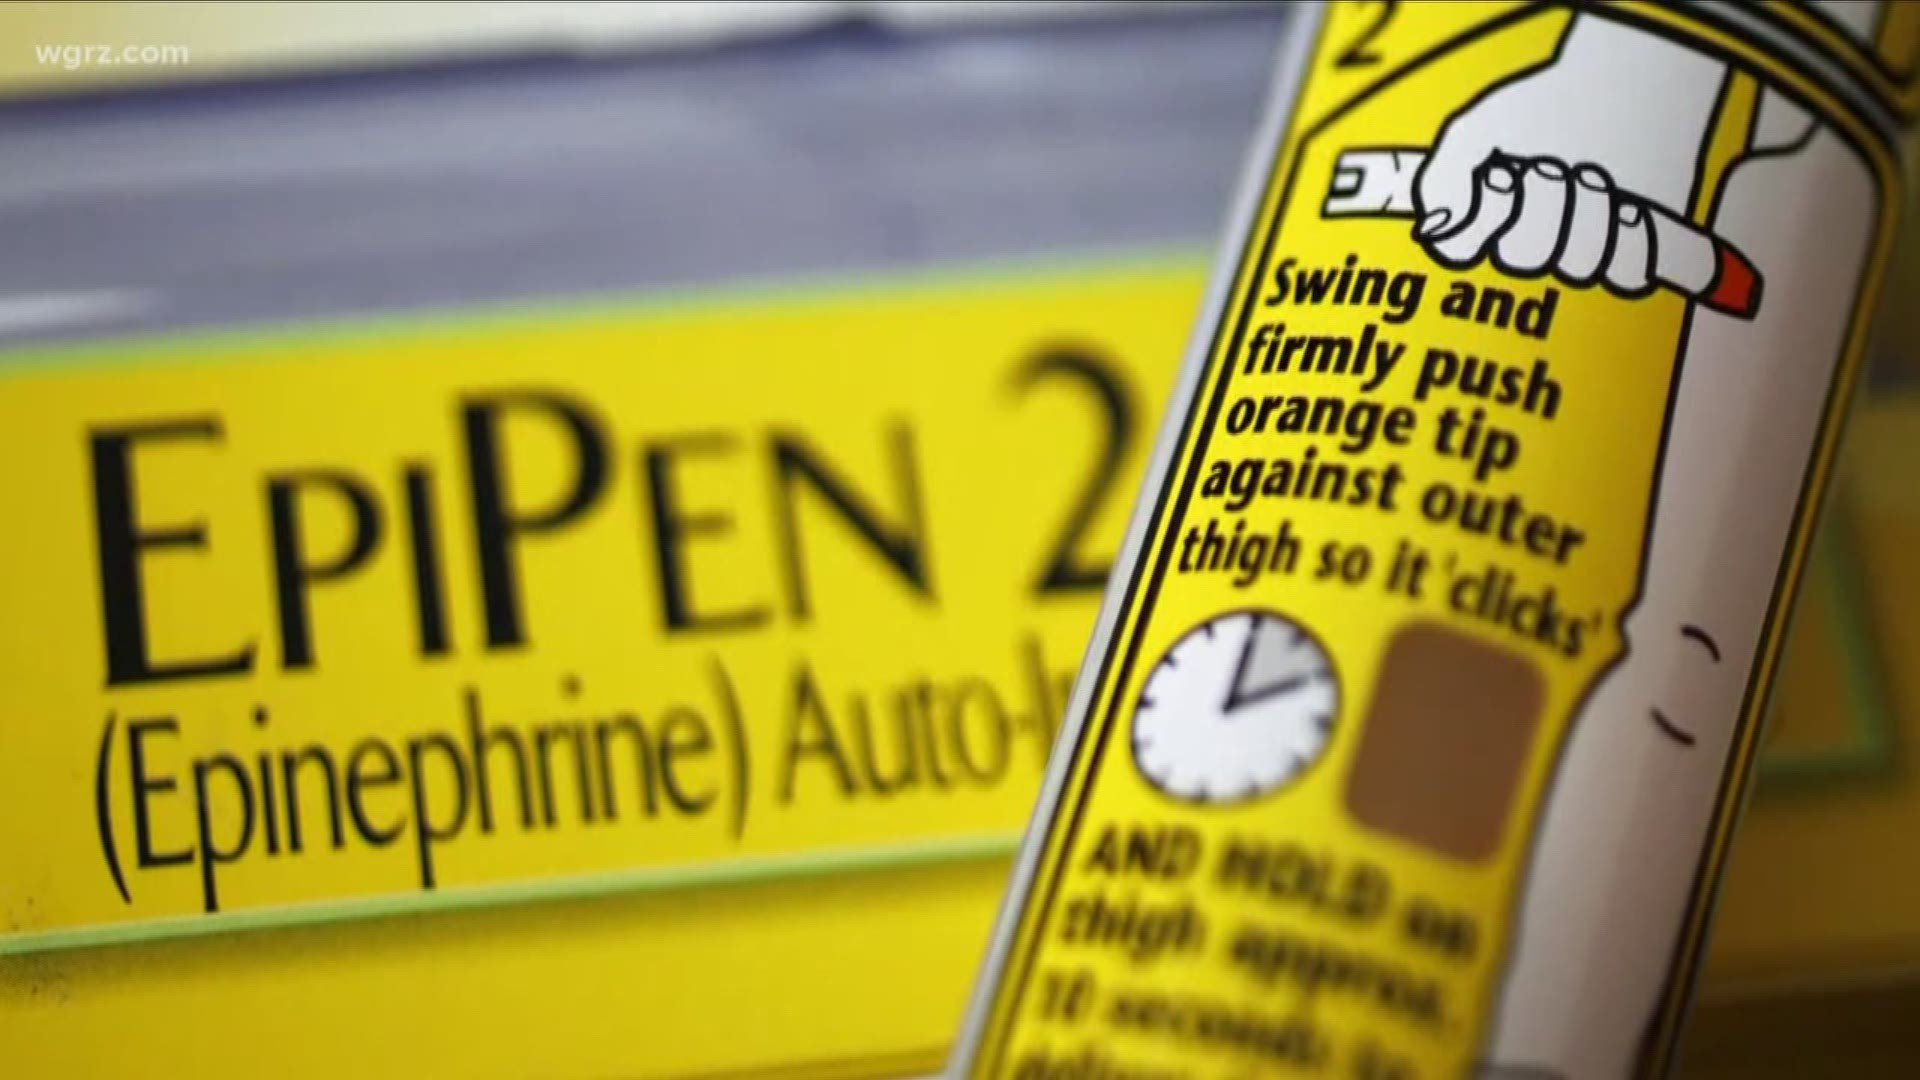 The Senate just passed a bill that would allow those first responders to carry epipens.